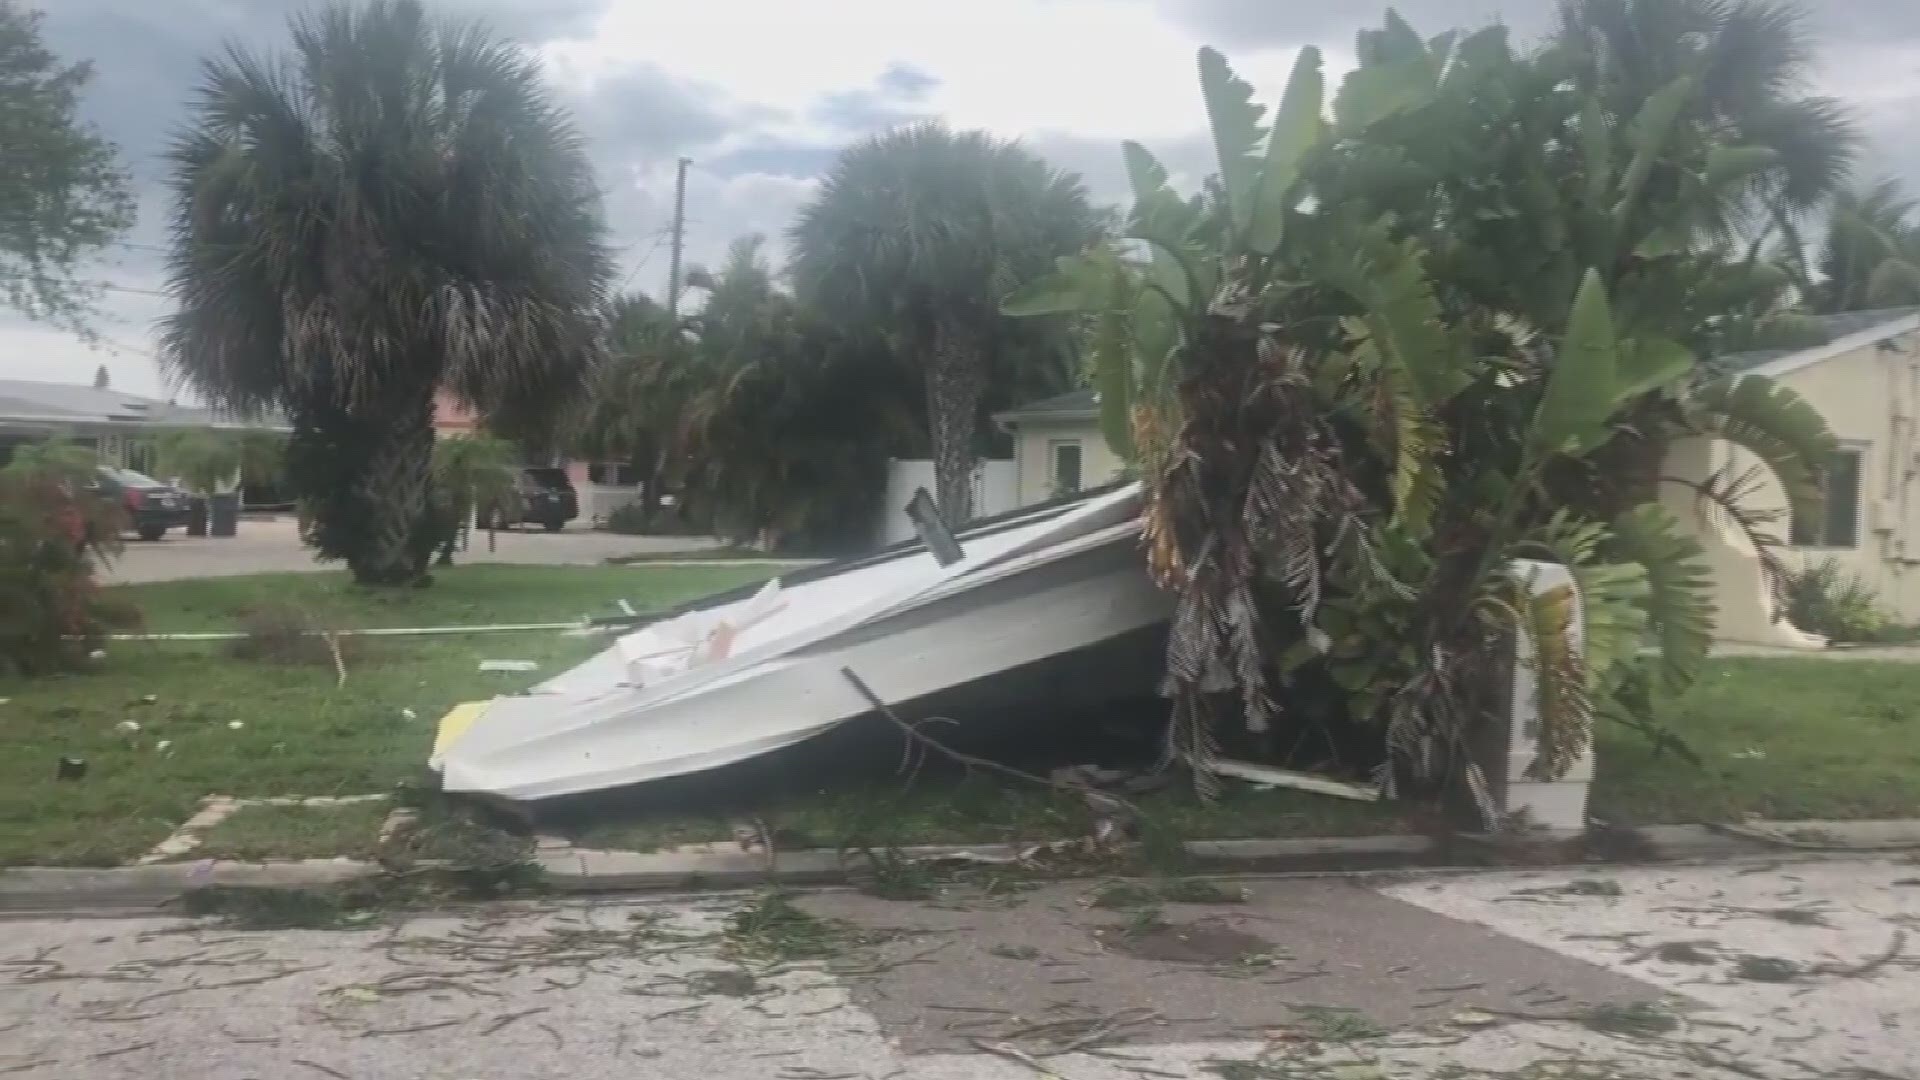 A possible waterspout moved ashore Sunday, May 5, at Madeira Beach and tore a back porch off a house and carried it into another neighbor’s yard. The damage to this neighborhood is obvious, with branches and power lines down.